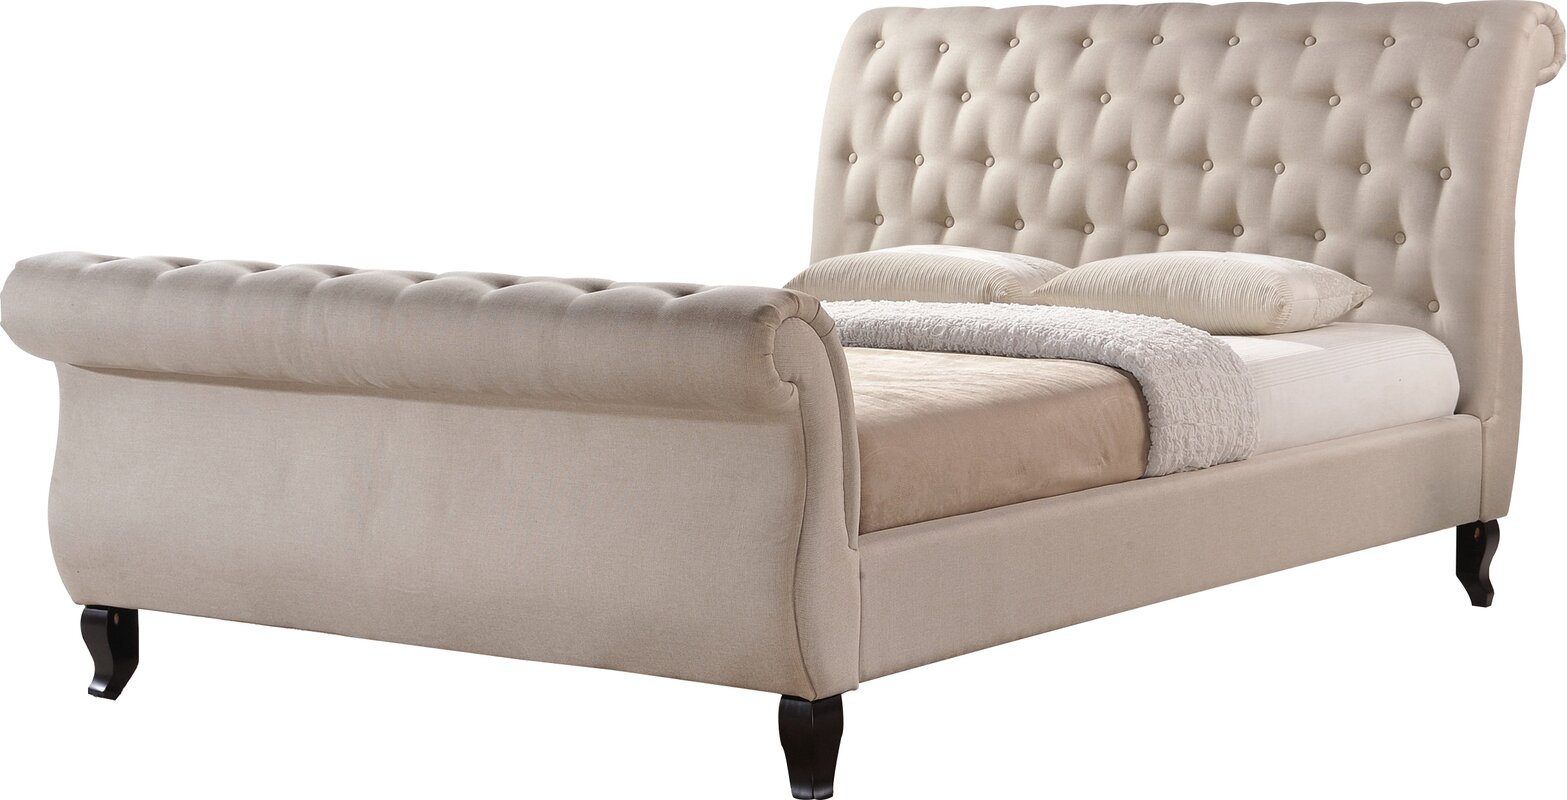 Wholesale Interiors Baxton Studio Upholstered Sleigh Bed